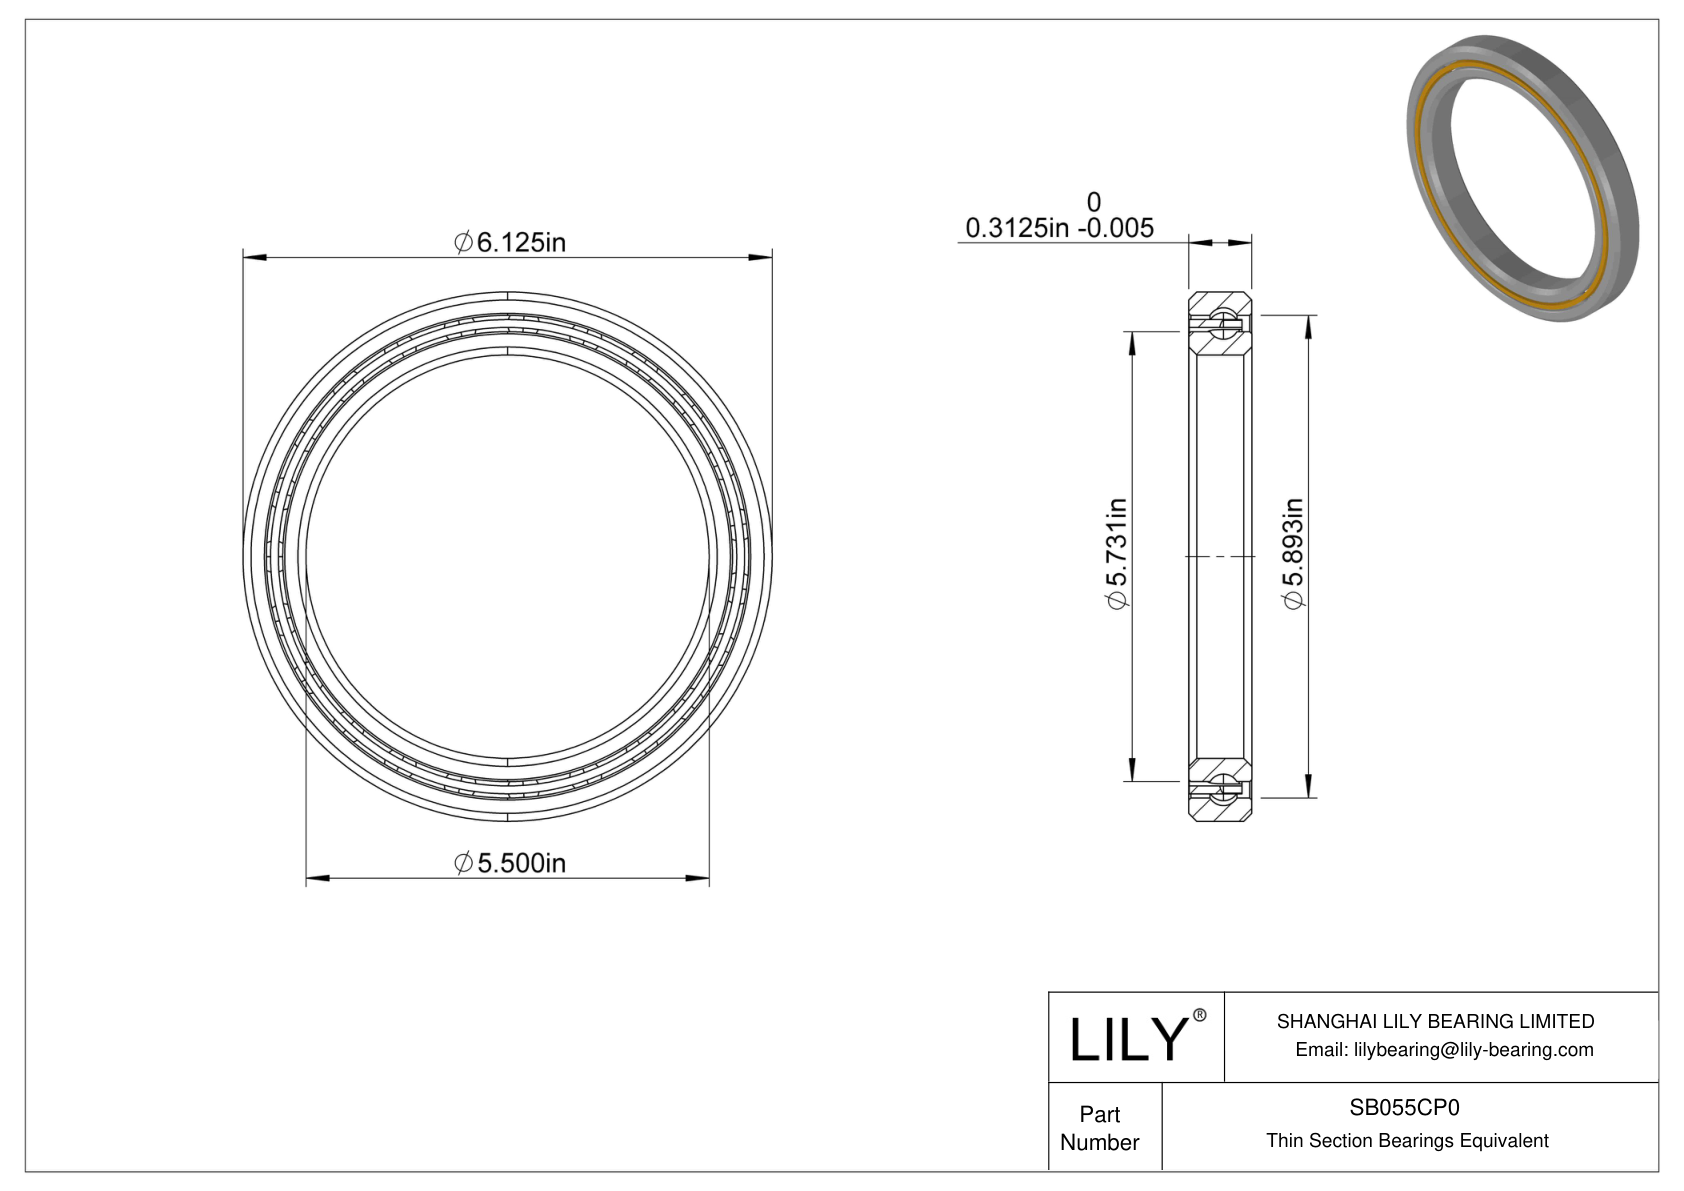 SB055CP0 Constant Section (CS) Bearings cad drawing